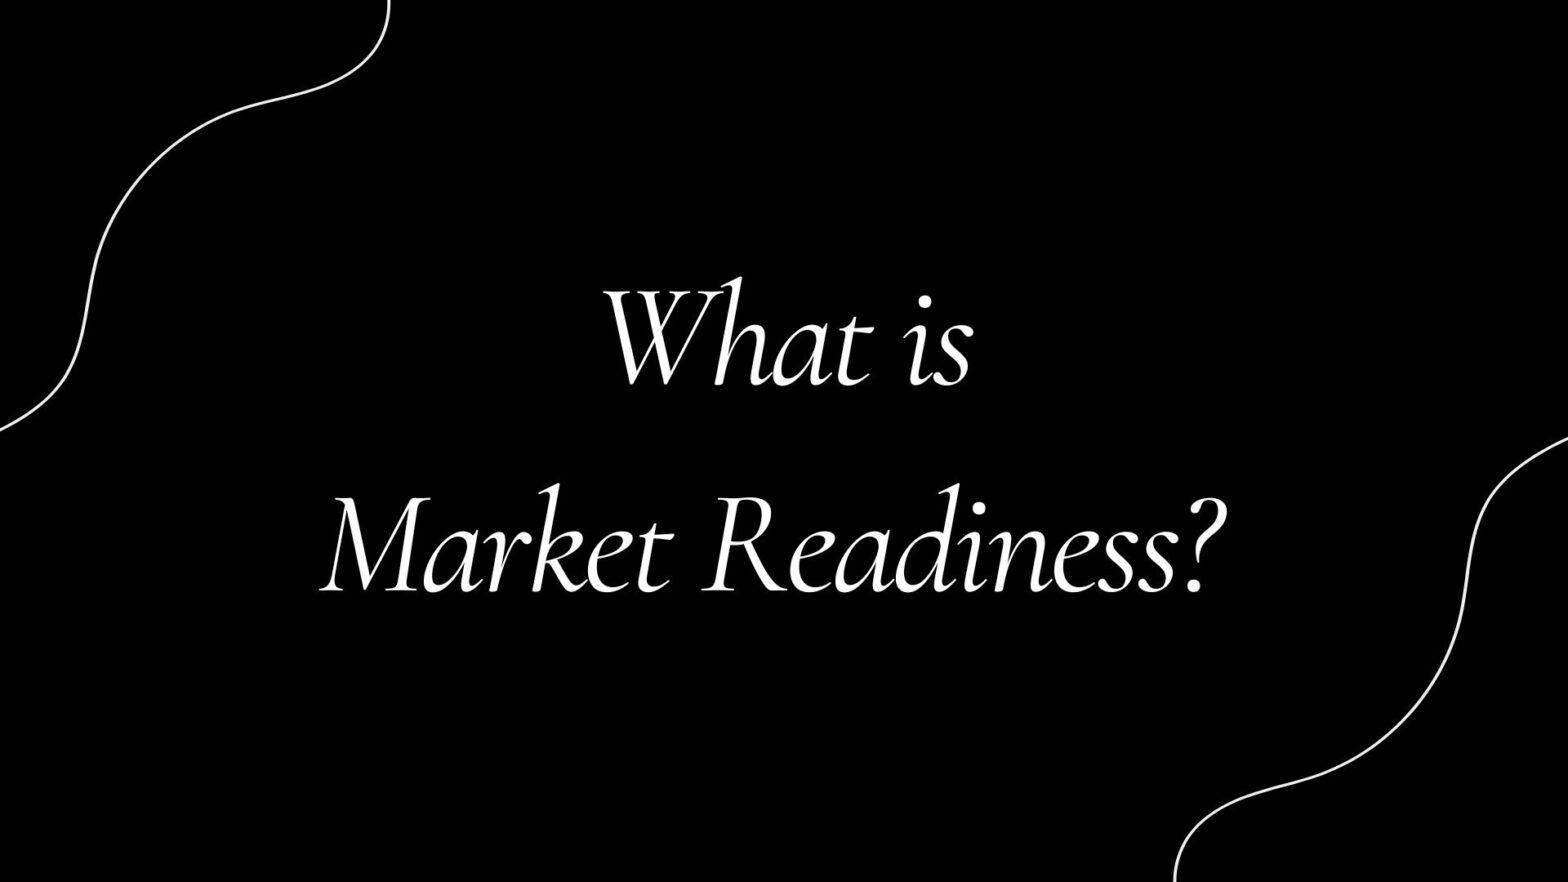 What is Market Readiness?